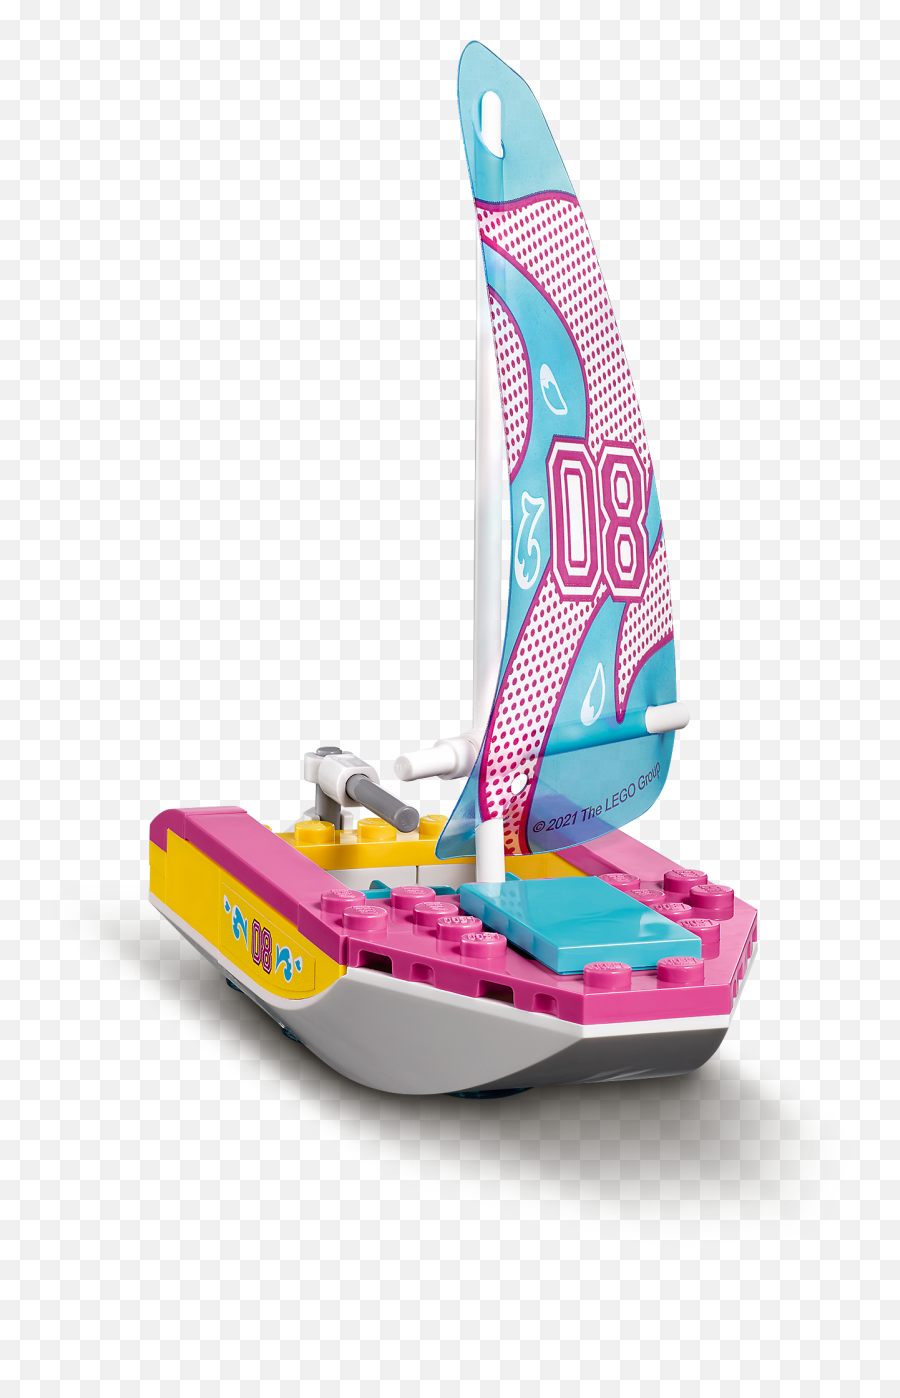 Forest Camper Van And Sailboat 41681 - Lego Friends Sets Lego Friends Forest Camper Van And Sailboat Emoji,Sailing Emoticon